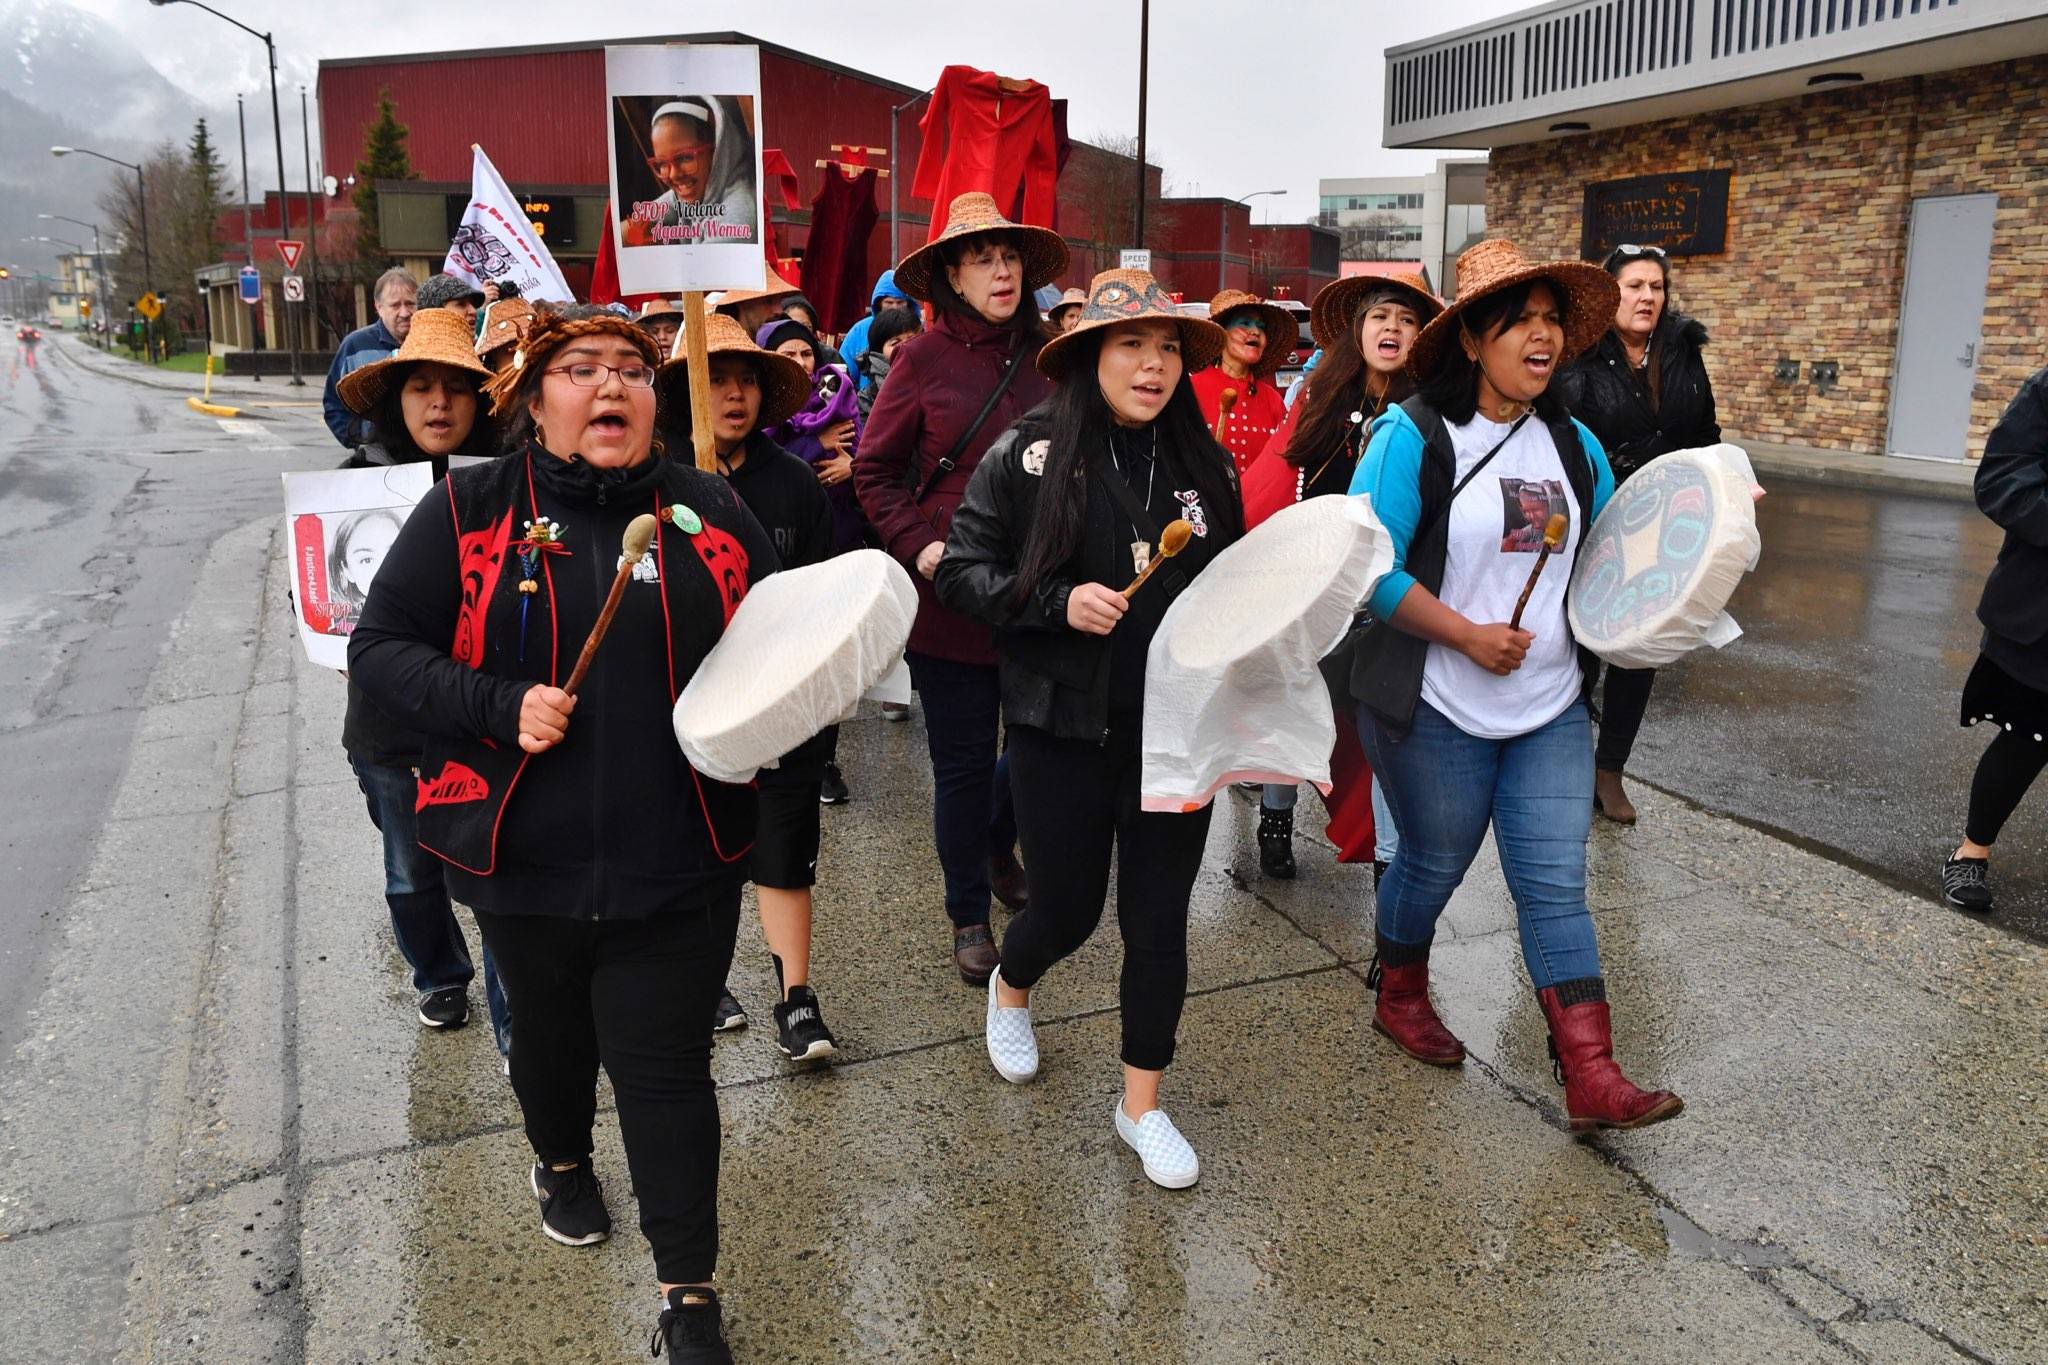 Drummers lead over one hundred people in a Violence Against Women Awareness march and rally from the Elizabeth Peratrovich Hall to Sealaska Plaza on Tuesday, April 9, 2019. (Michael Penn | Juneau Empire)